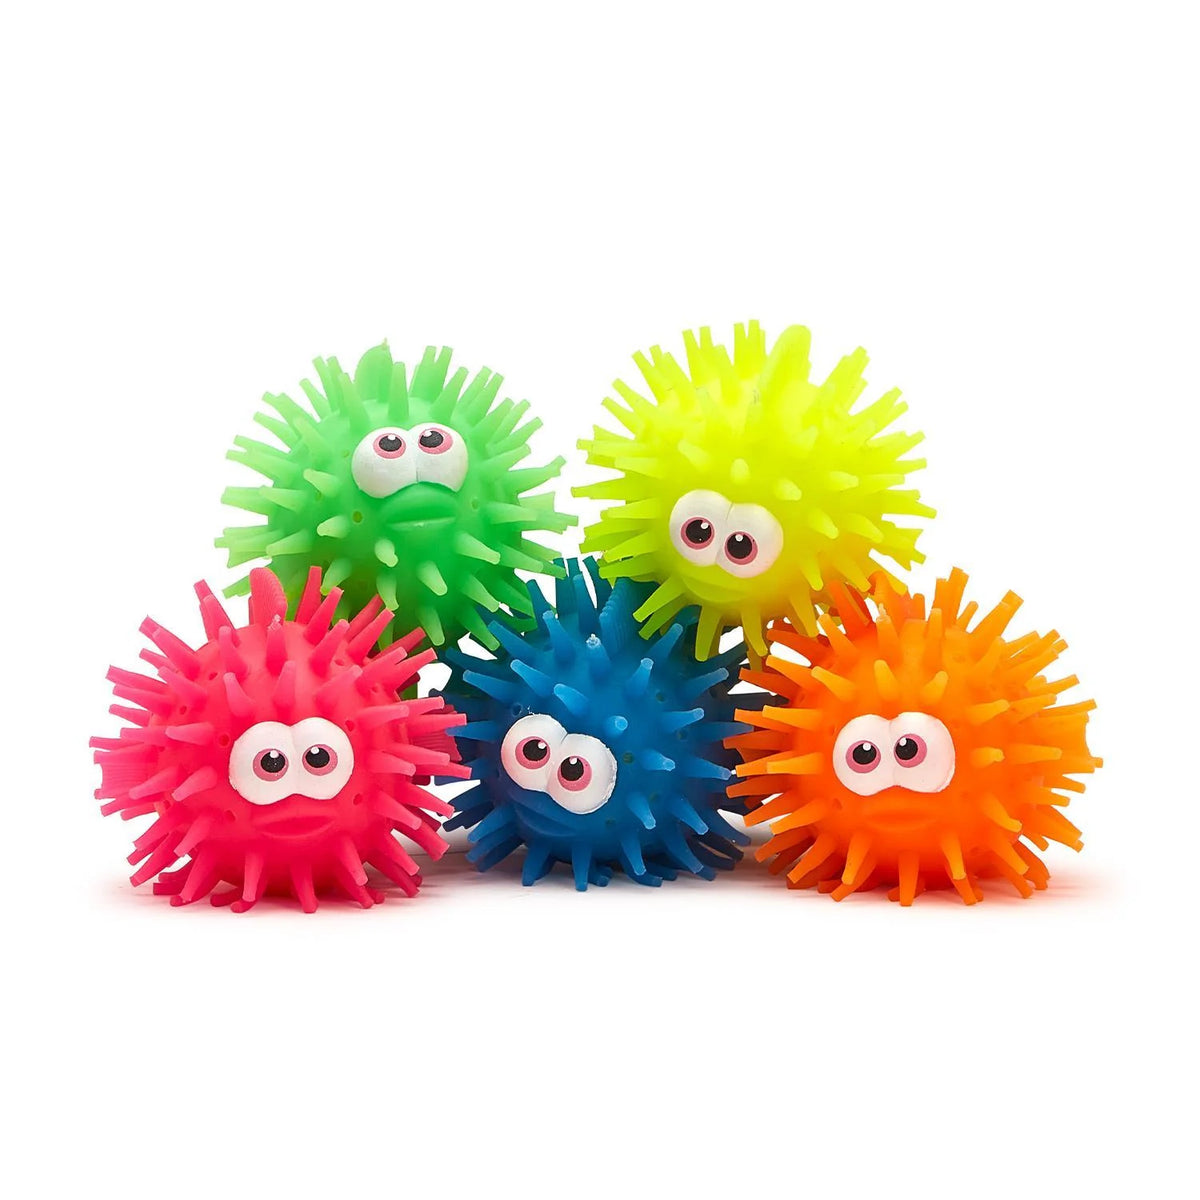 Cupcakes & Cartwheels Puffer Fish Water Toy - Assorted Colors